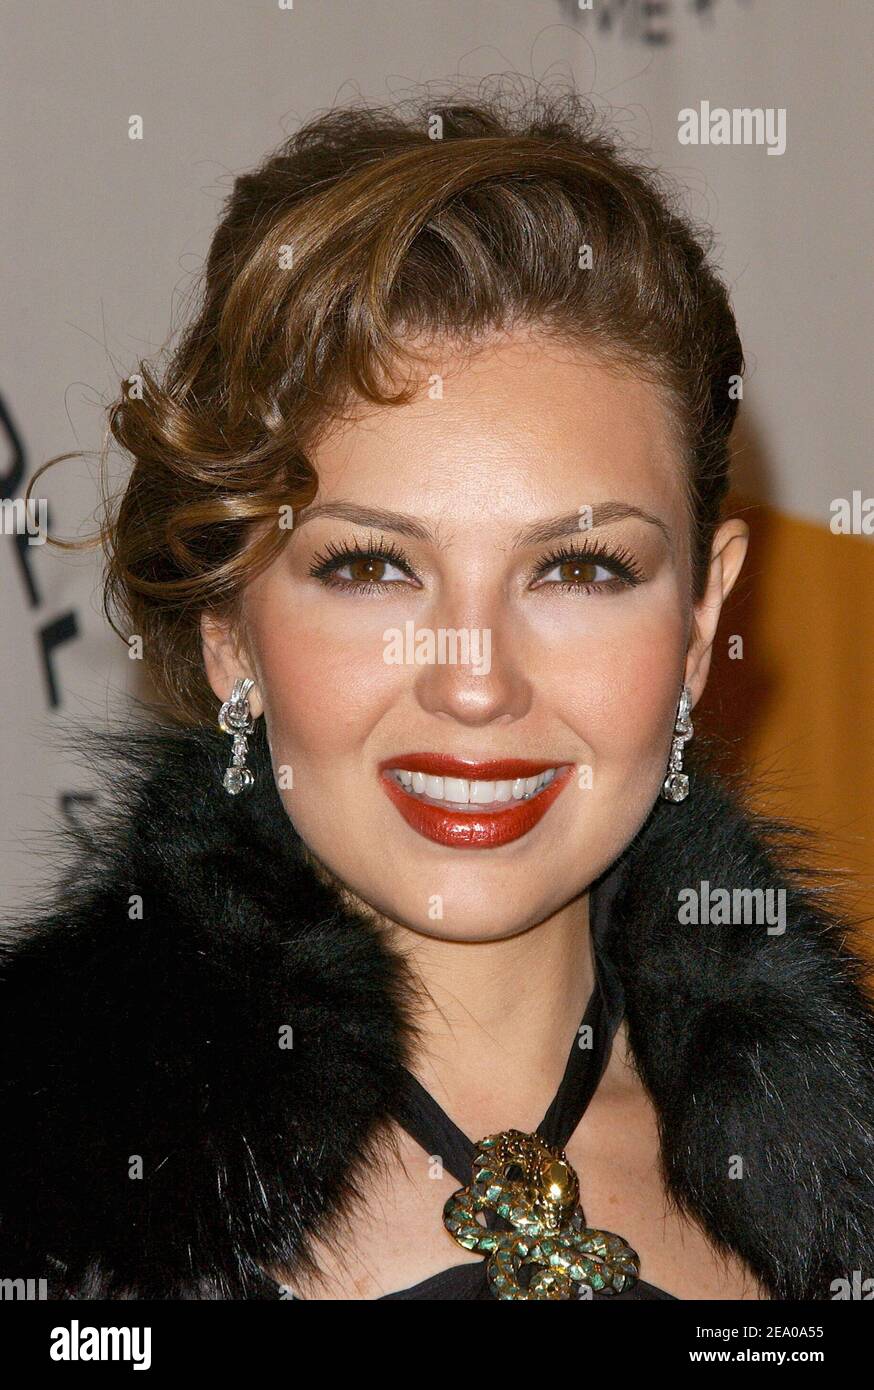 Latin Singer Thalia arriving at the 2005 Rock And Roll Hall of Fame Ceremony held at the Waldorf Astoria in New York, NY on March 14, 2005. Photo By Nicolas Khayat/ABACA. Stock Photo